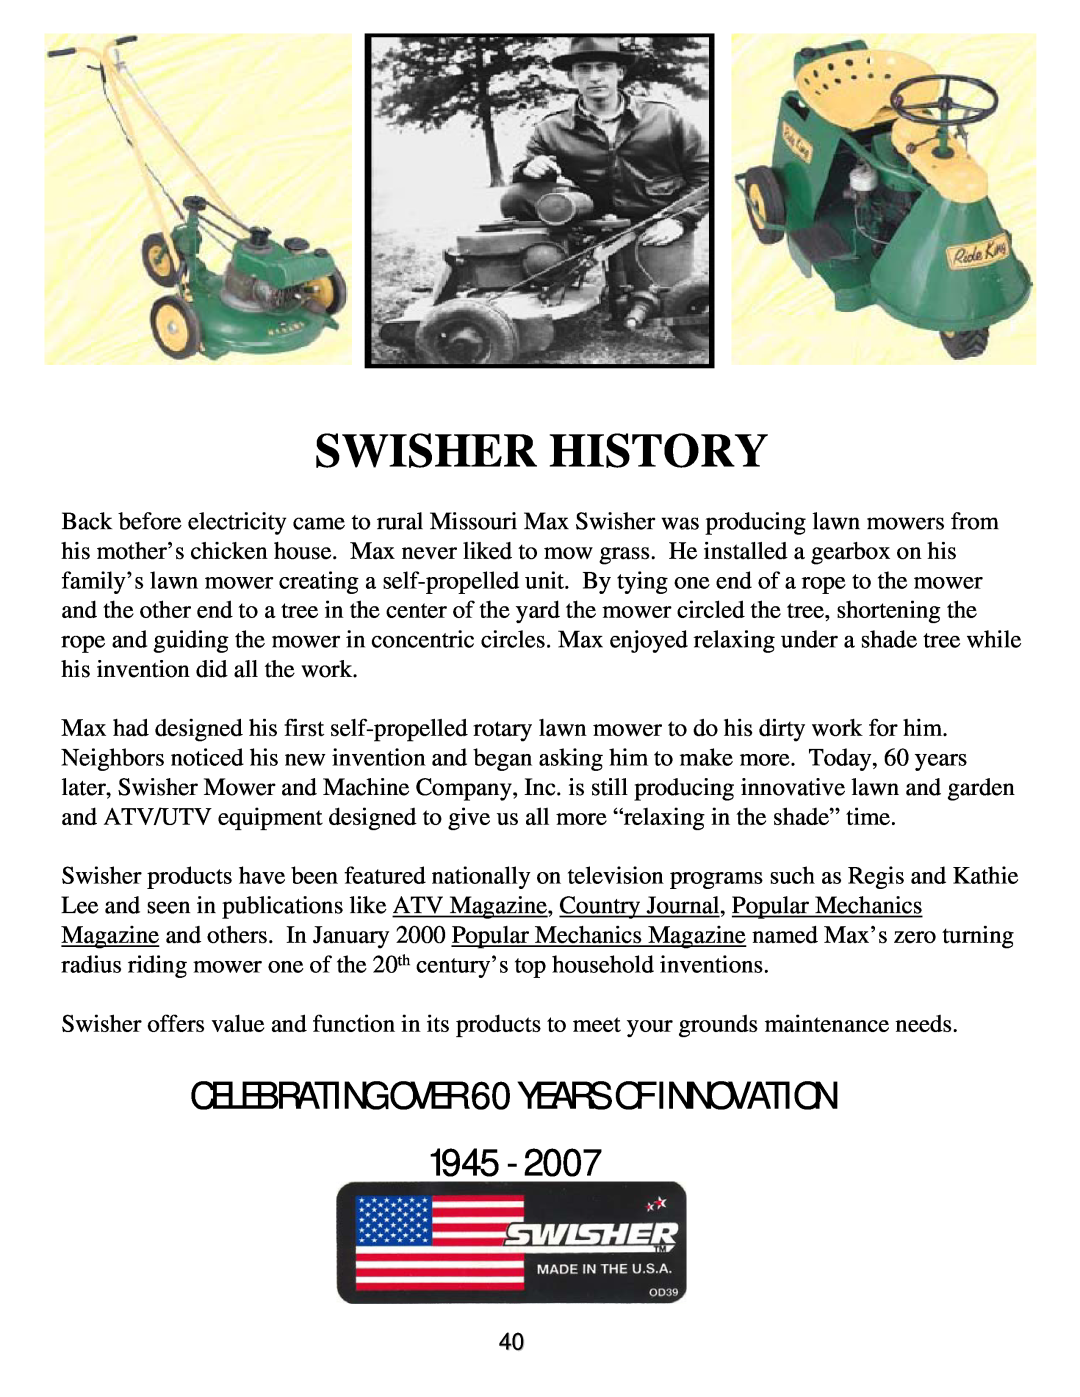 Swisher ZT2350A manual Swisher History, CELEBRATING OVER 60 YEARS OF INNOVATION 